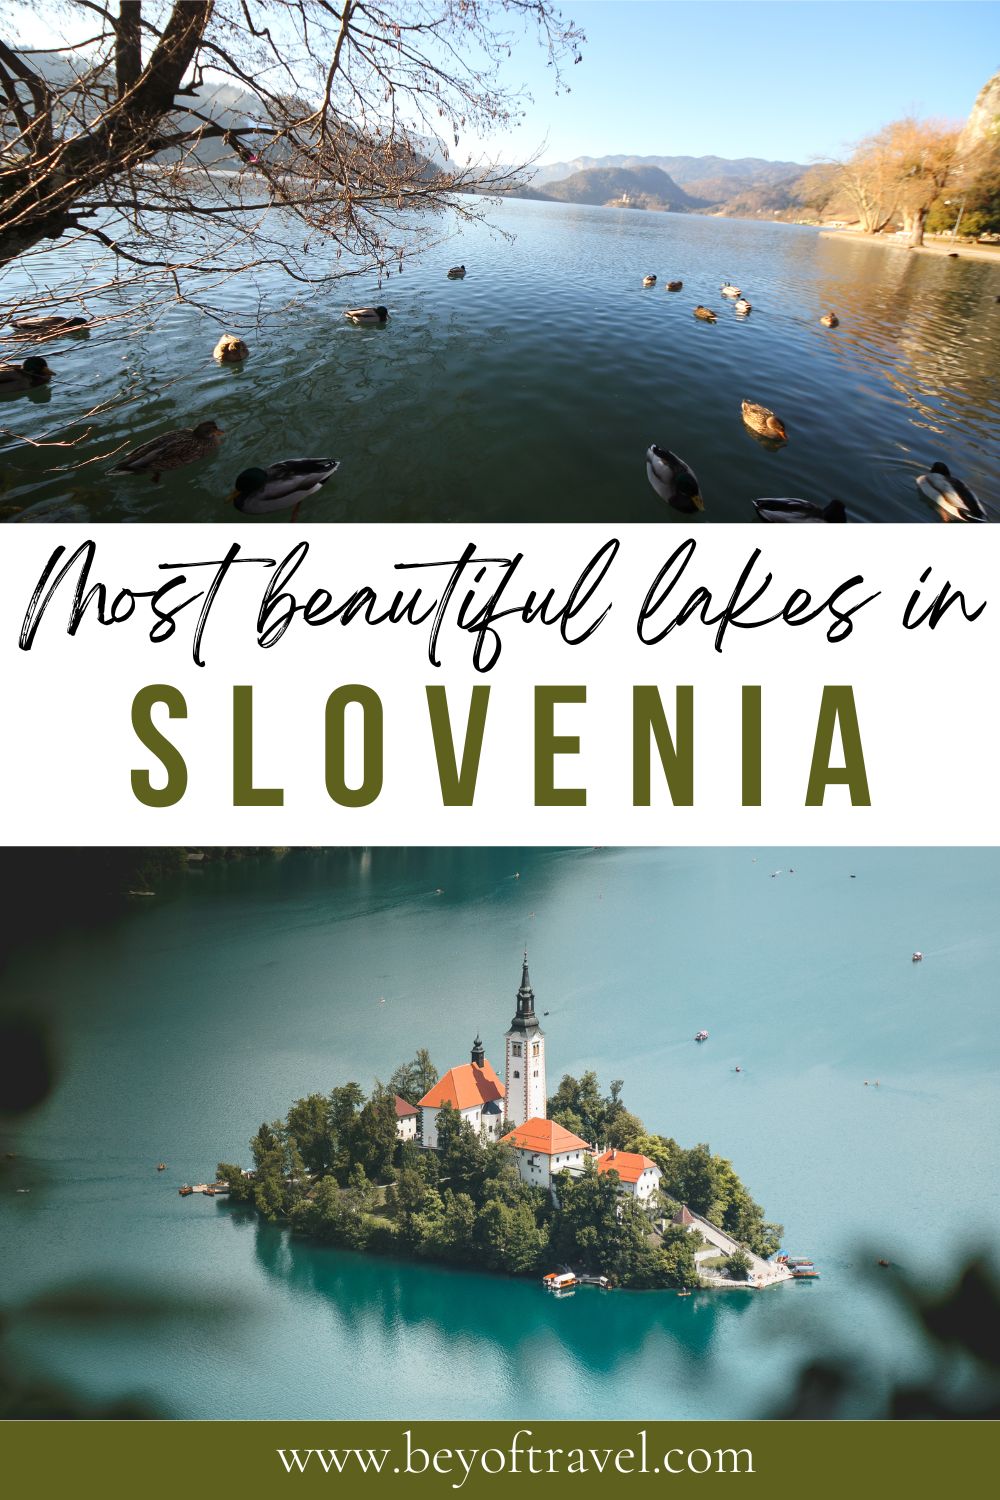 Most beautiful lakes in Slovenia